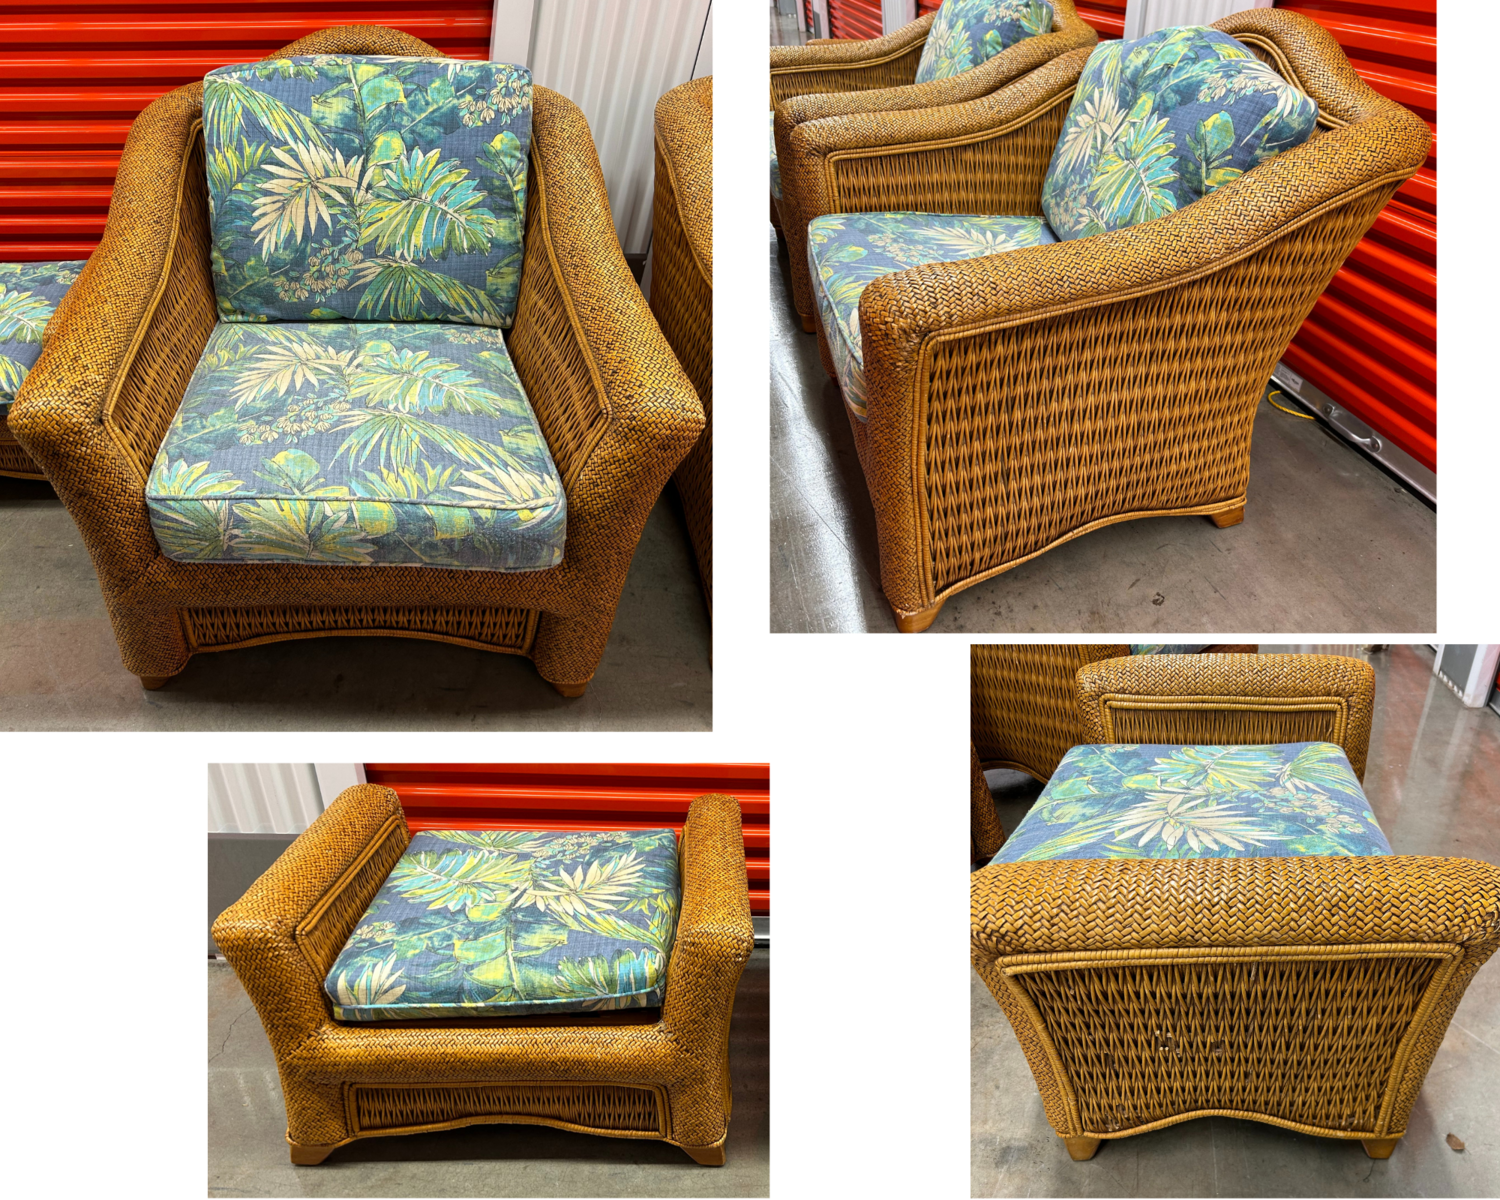 Set: Vintage Rattan Chair &amp; Ottoman, 2 sets available, made in Indonesia #2123, EACH ** 3 mos. to sell, 30% off sale $168 ea